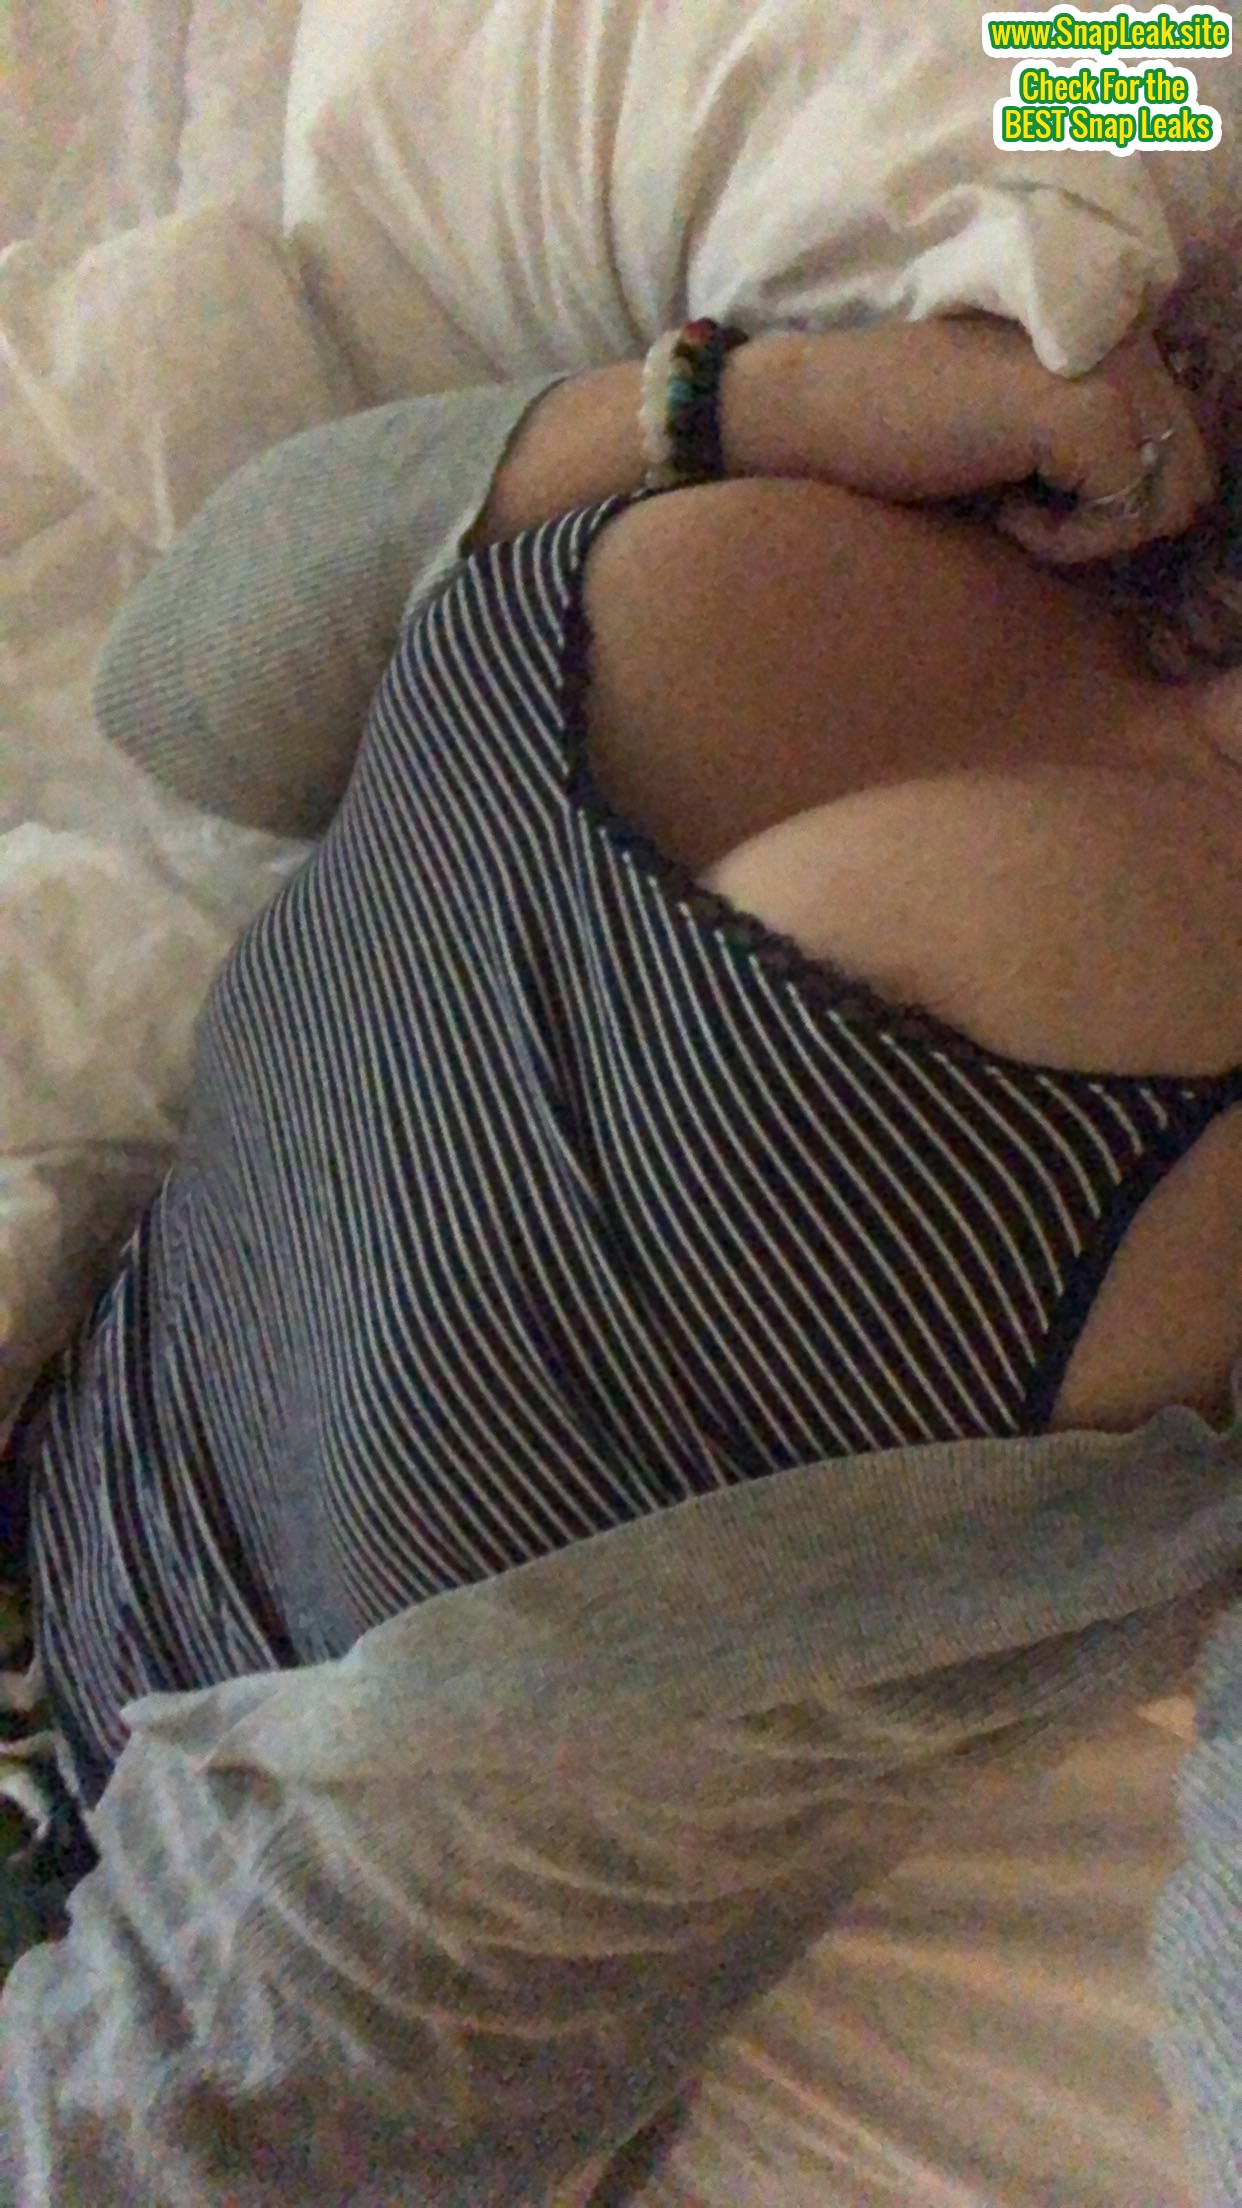 Young Attractive Teen Girl Leaked Snapchat